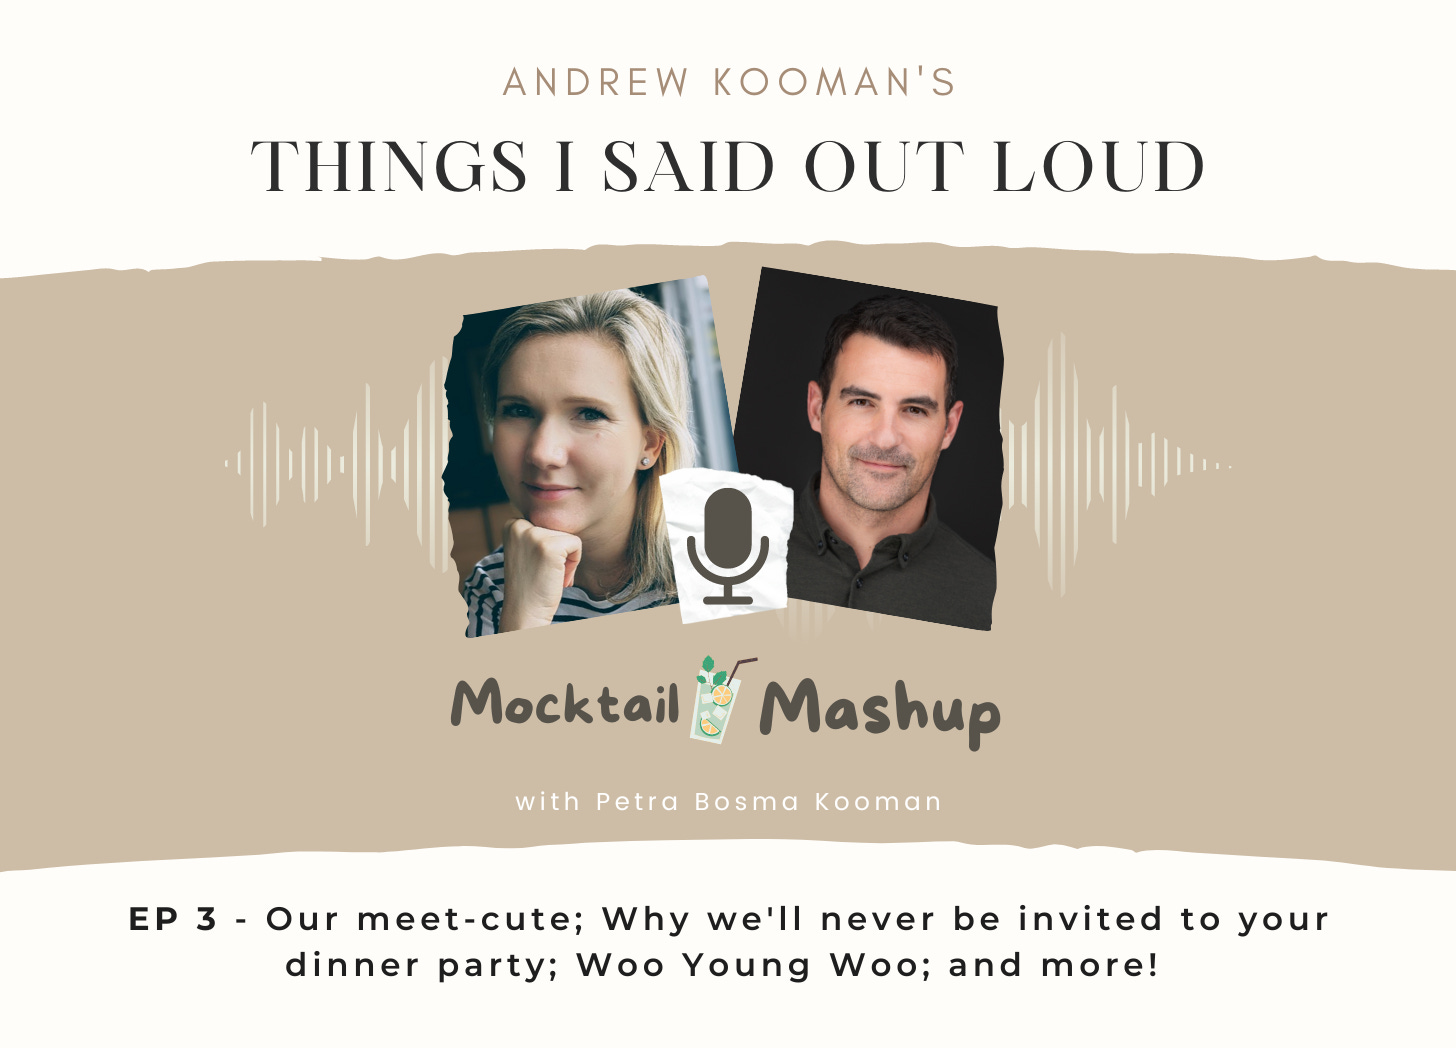 Andrew Kooman's Things I Said Out Loud - Mocktail Mashup Episode 3